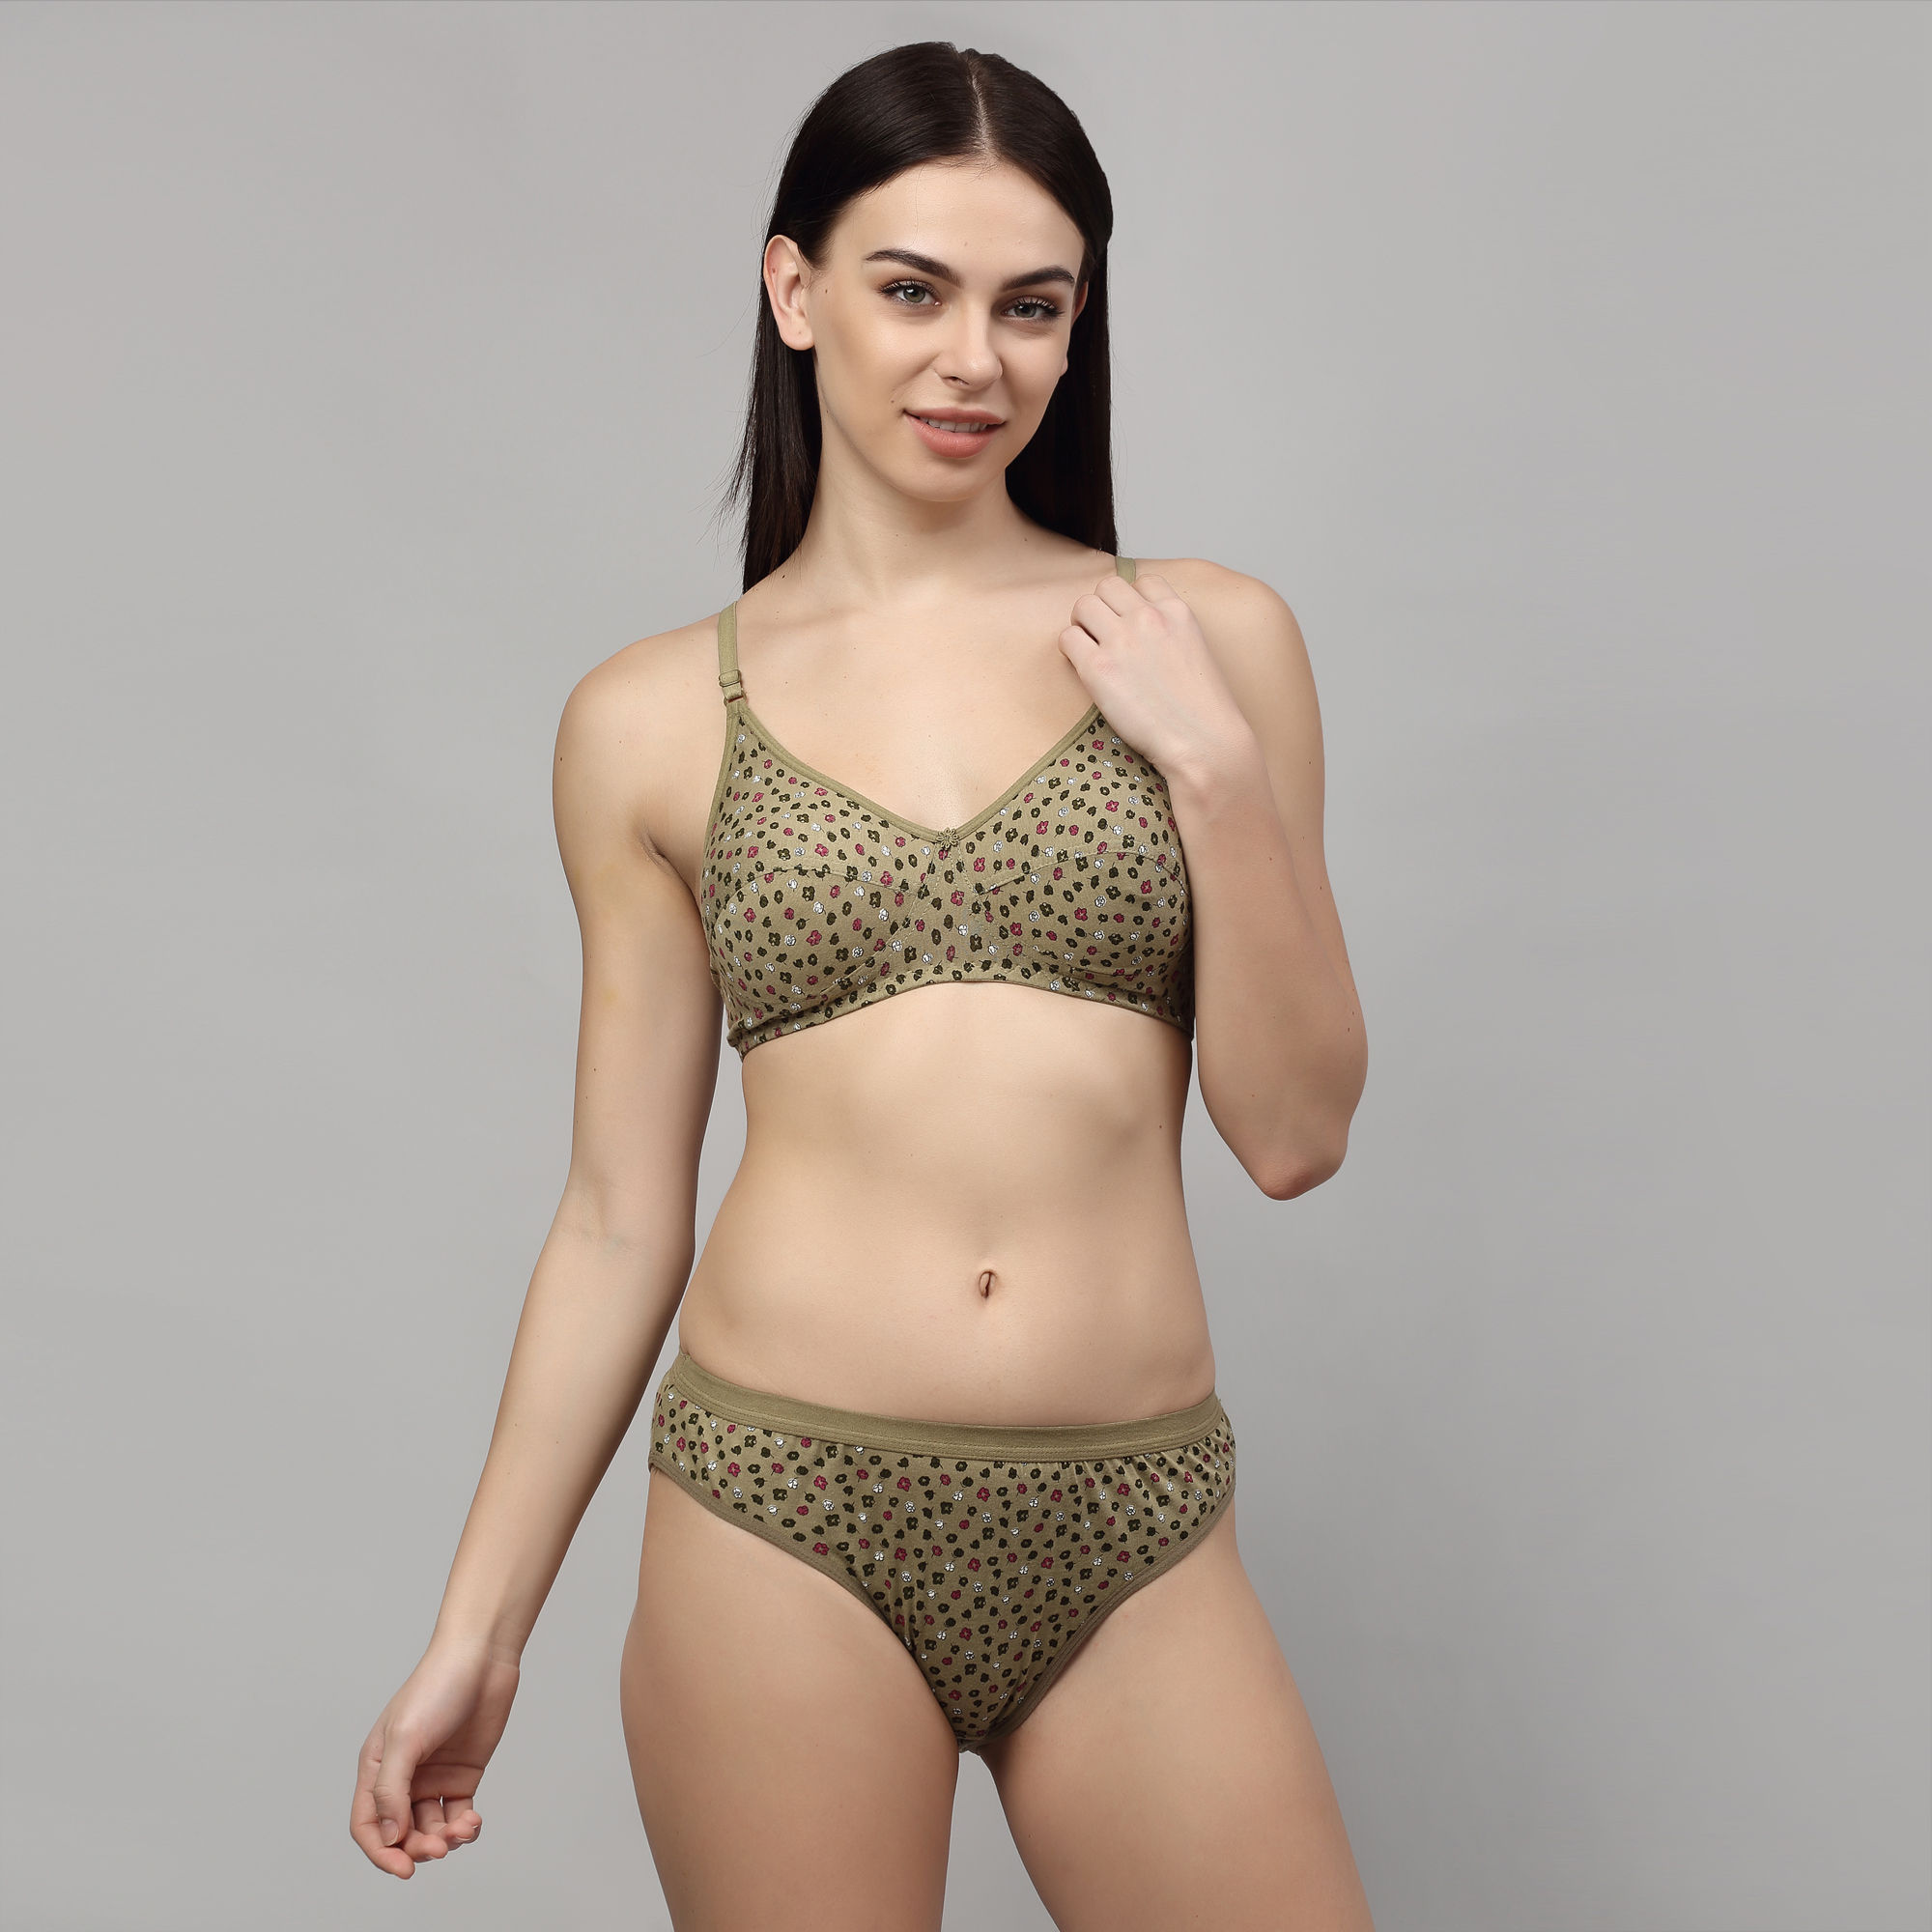 Buy Green Bras for Women by Quttos Online